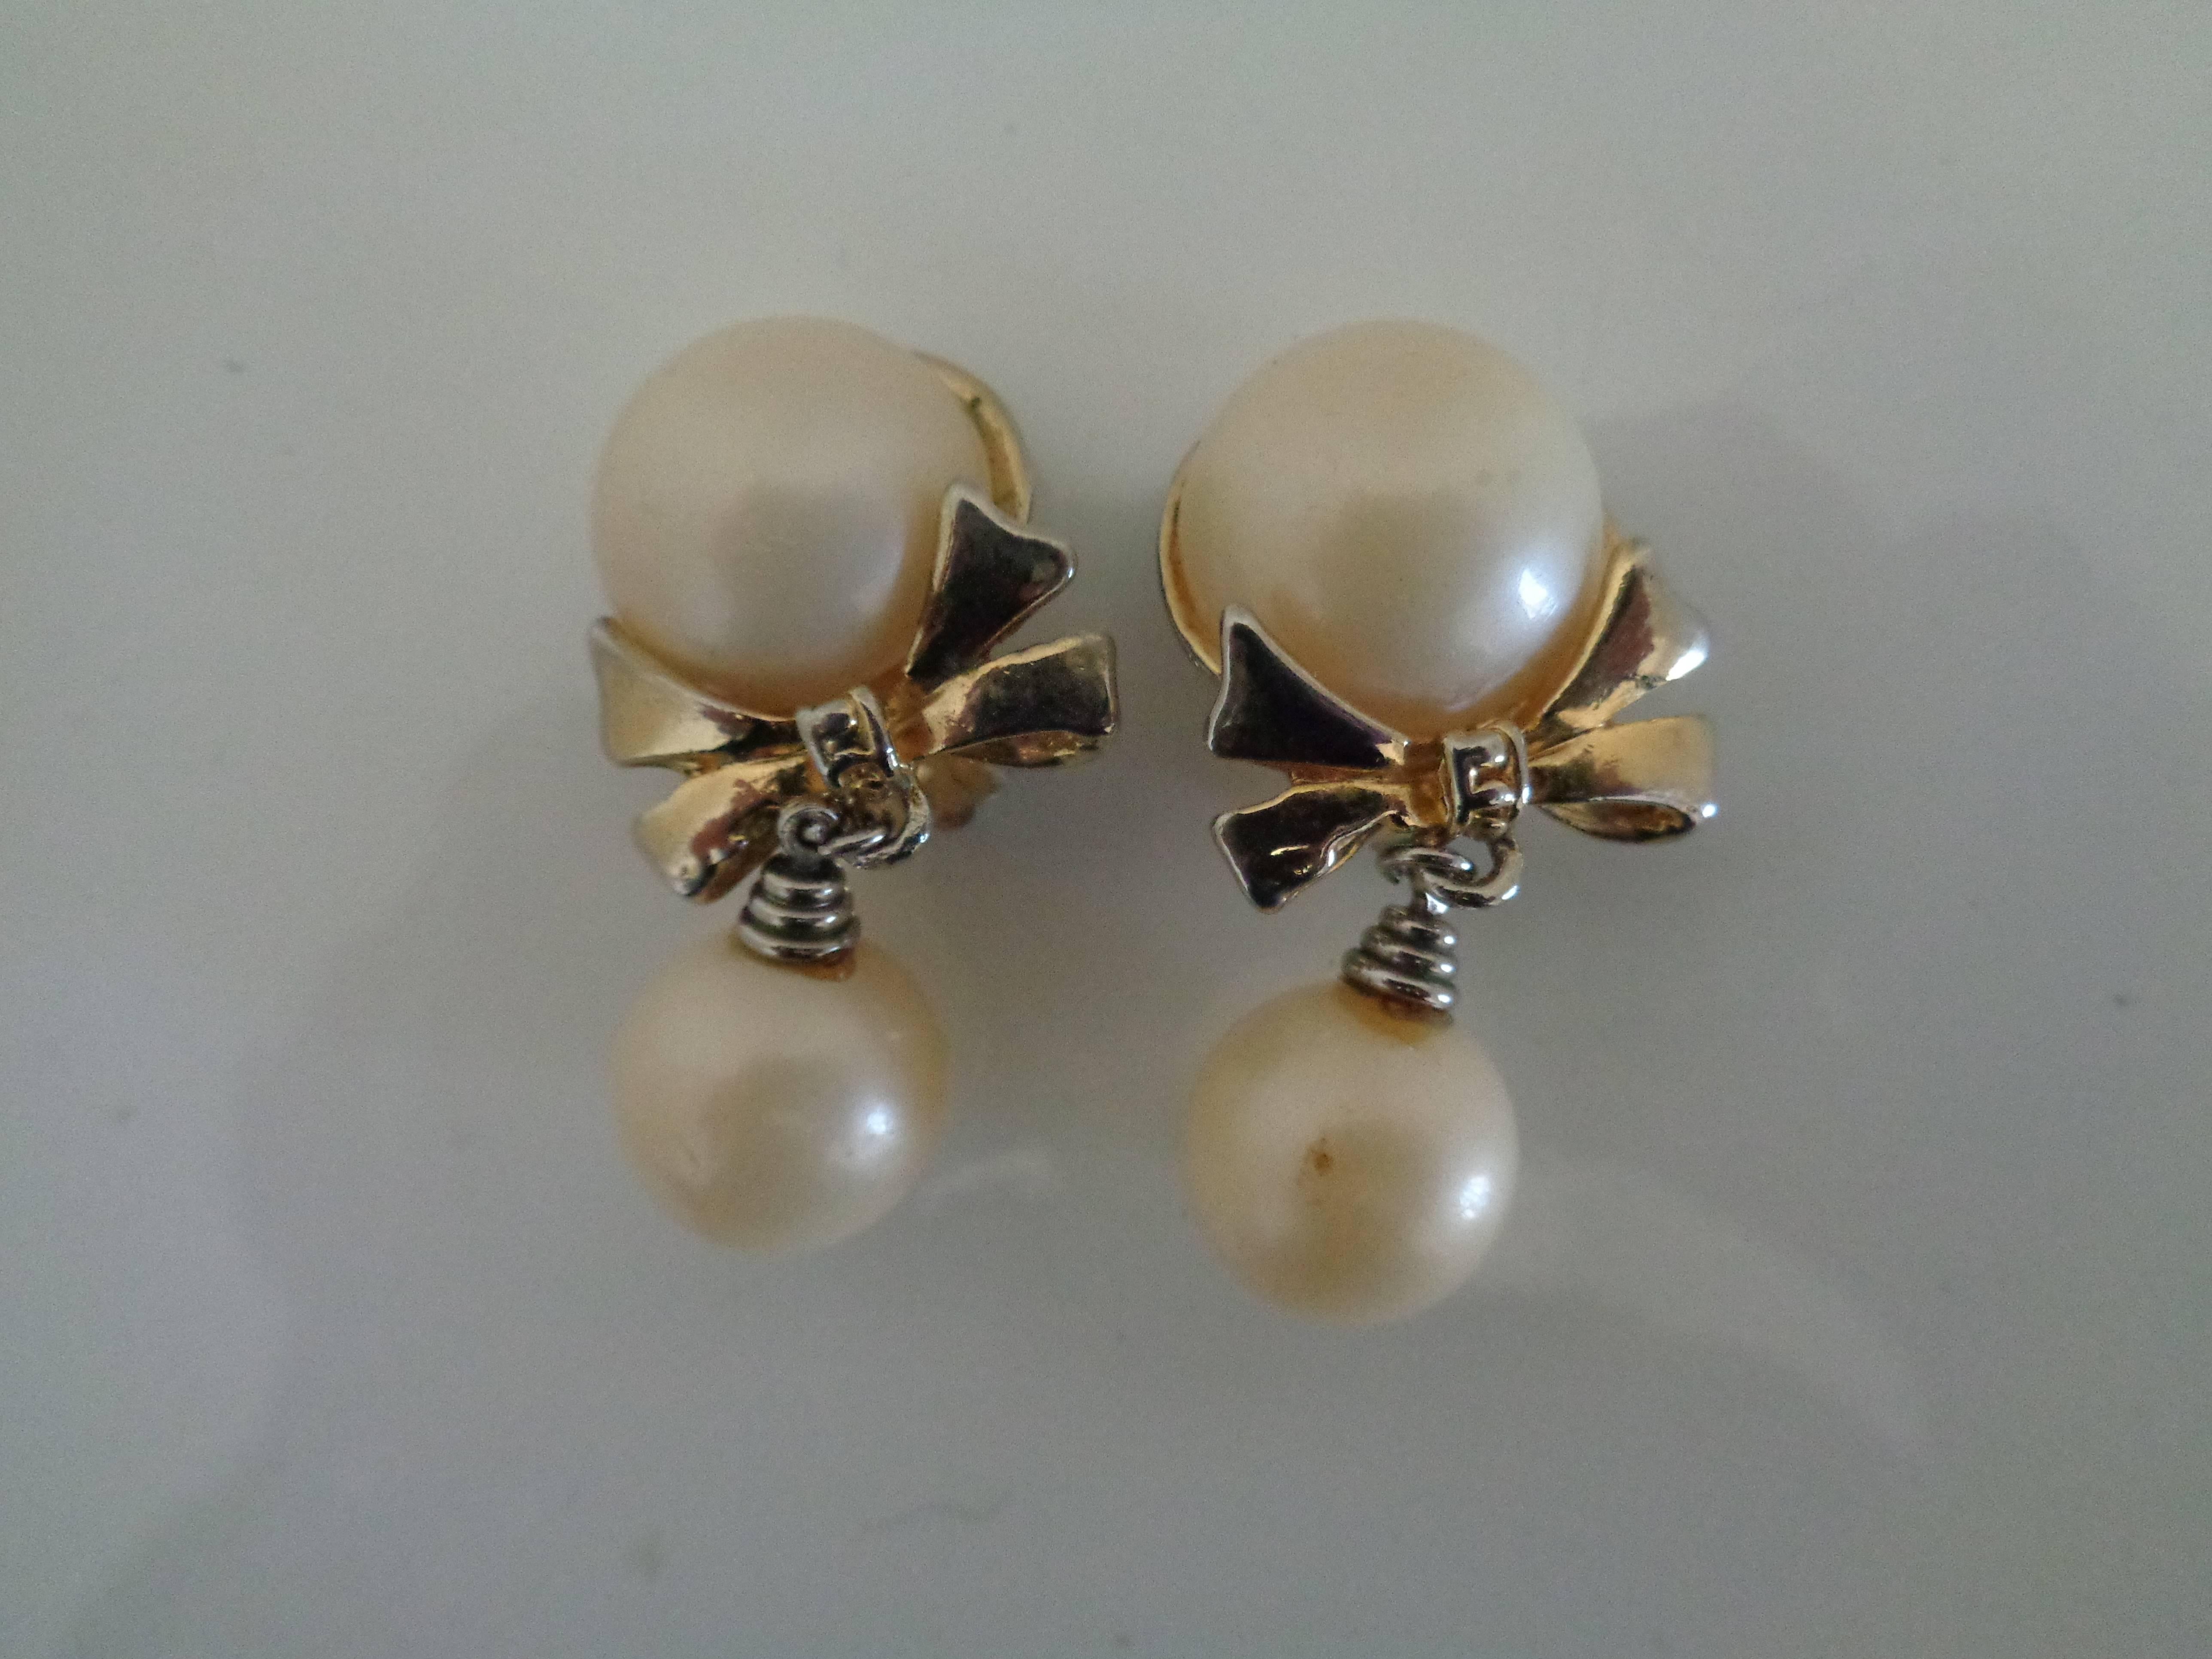 Gold Tone Faux White Pearls Bows Clip on Earrings

total lenght 4cm